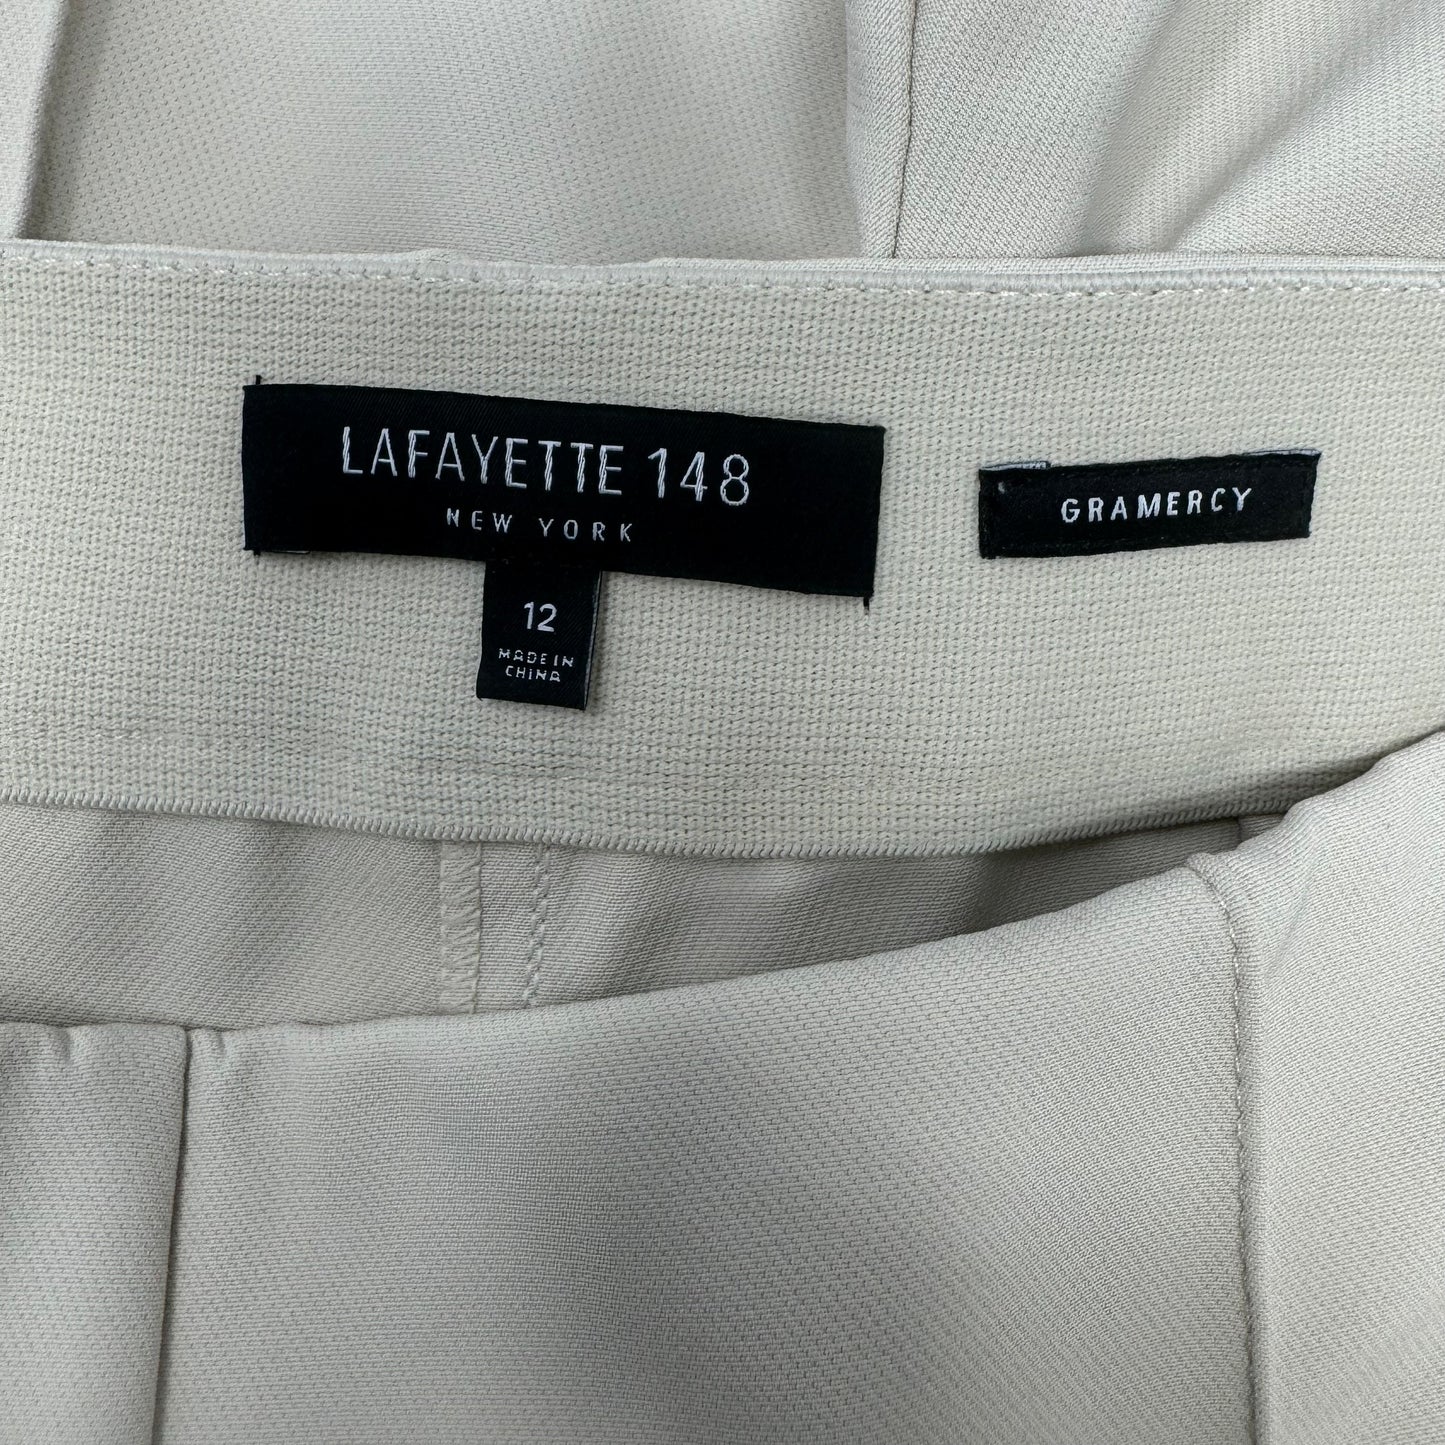 Stretch Grammercy Pant in Sand Designer Lafayette 148, Size 12